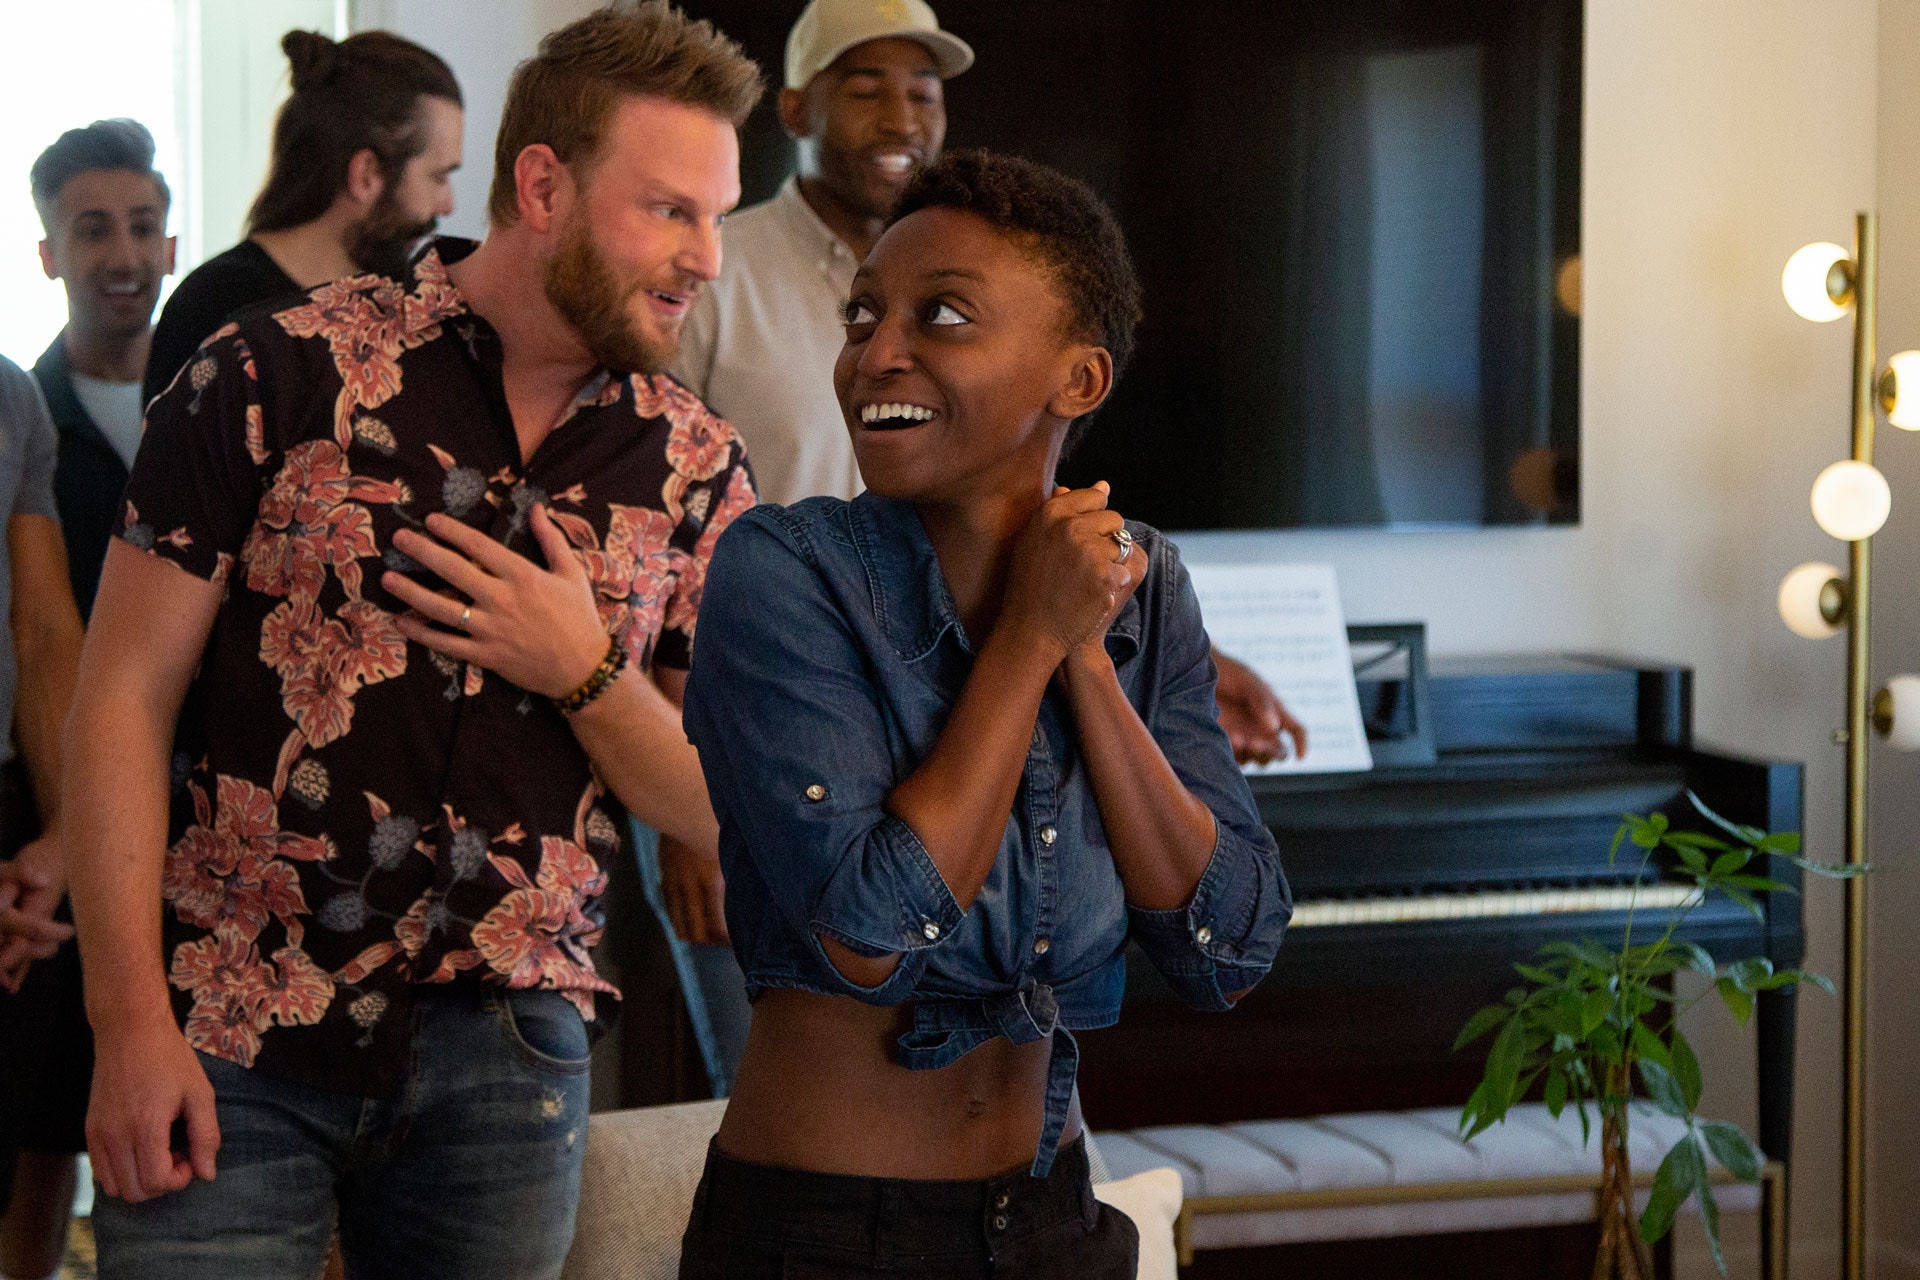 Queer Eye hero Jess reacts with surprise and delight to her remodeled home. The Fab Five follow her into the room.